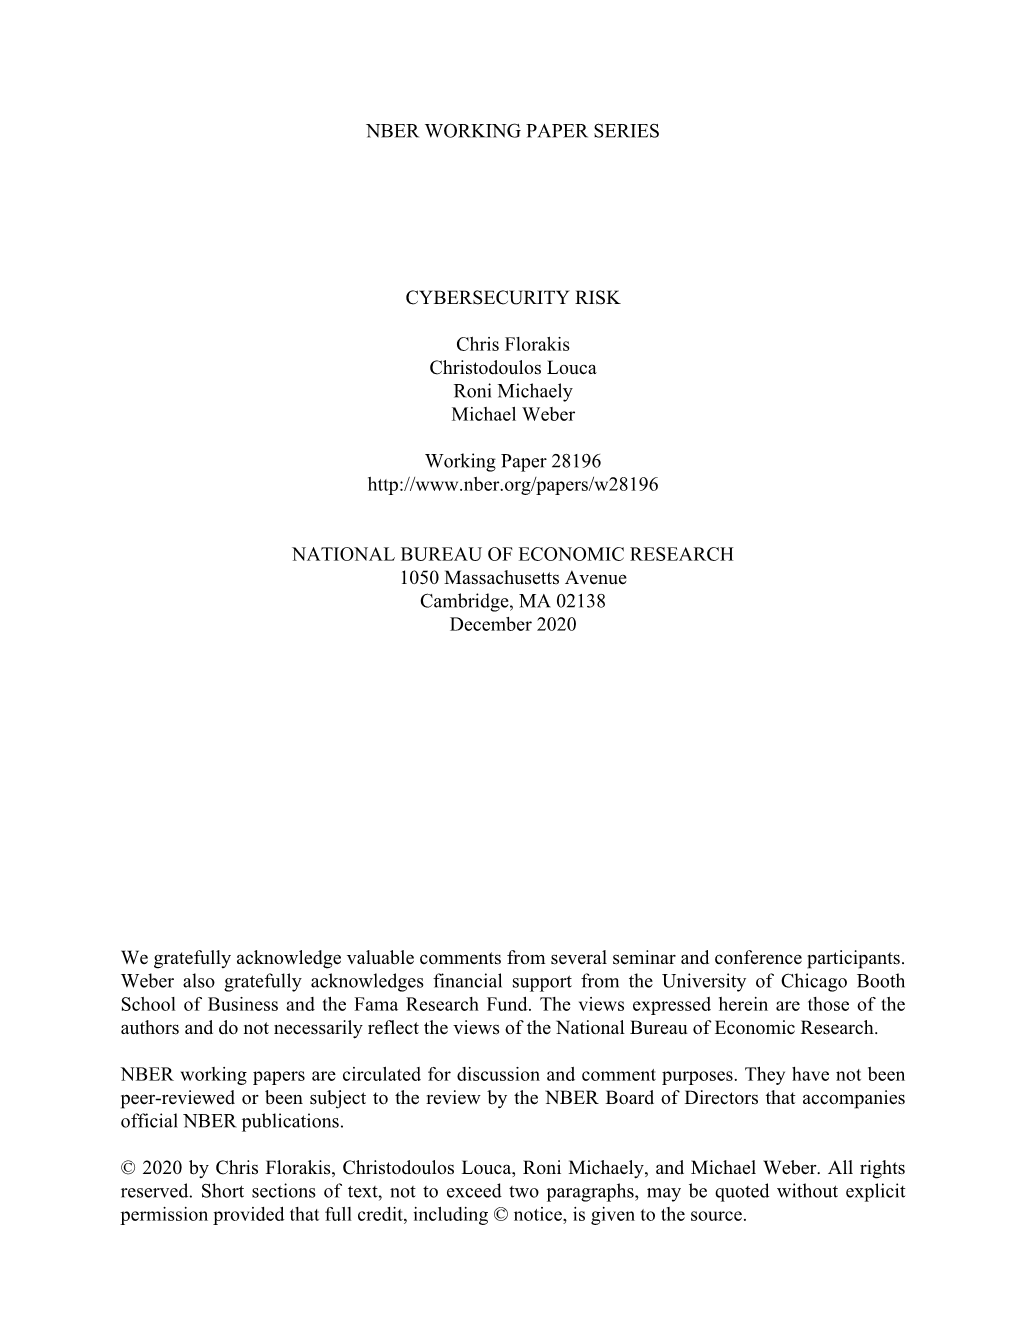 NBER WORKING PAPER SERIES CYBERSECURITY RISK Chris